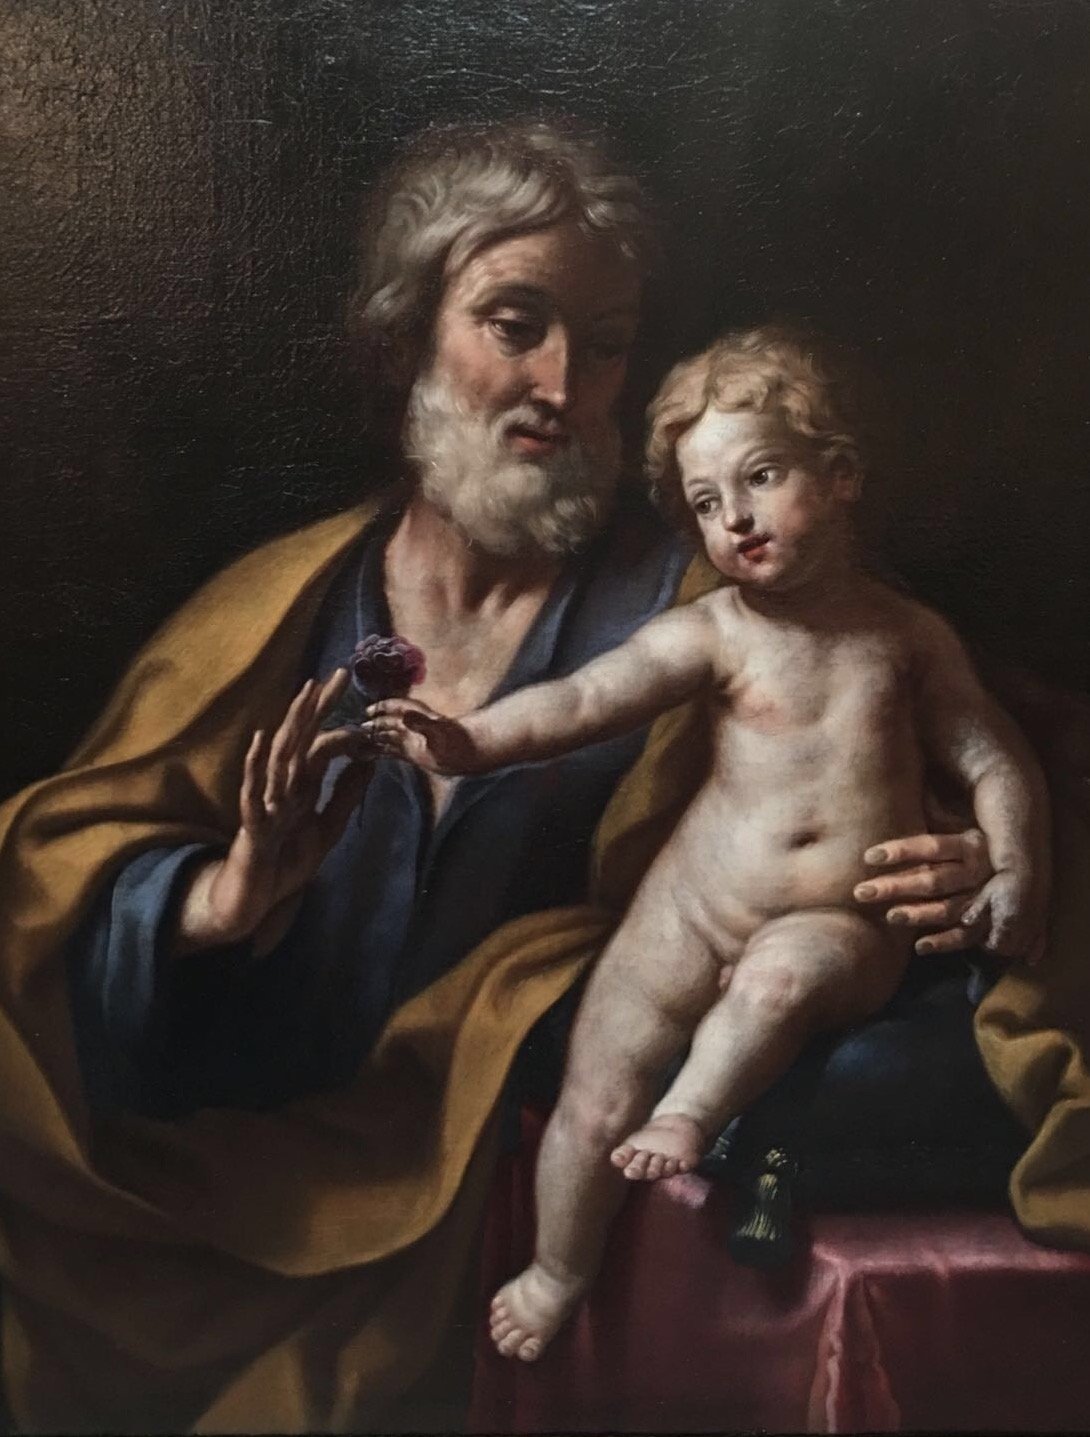 St. Joseph with Jesus as a child